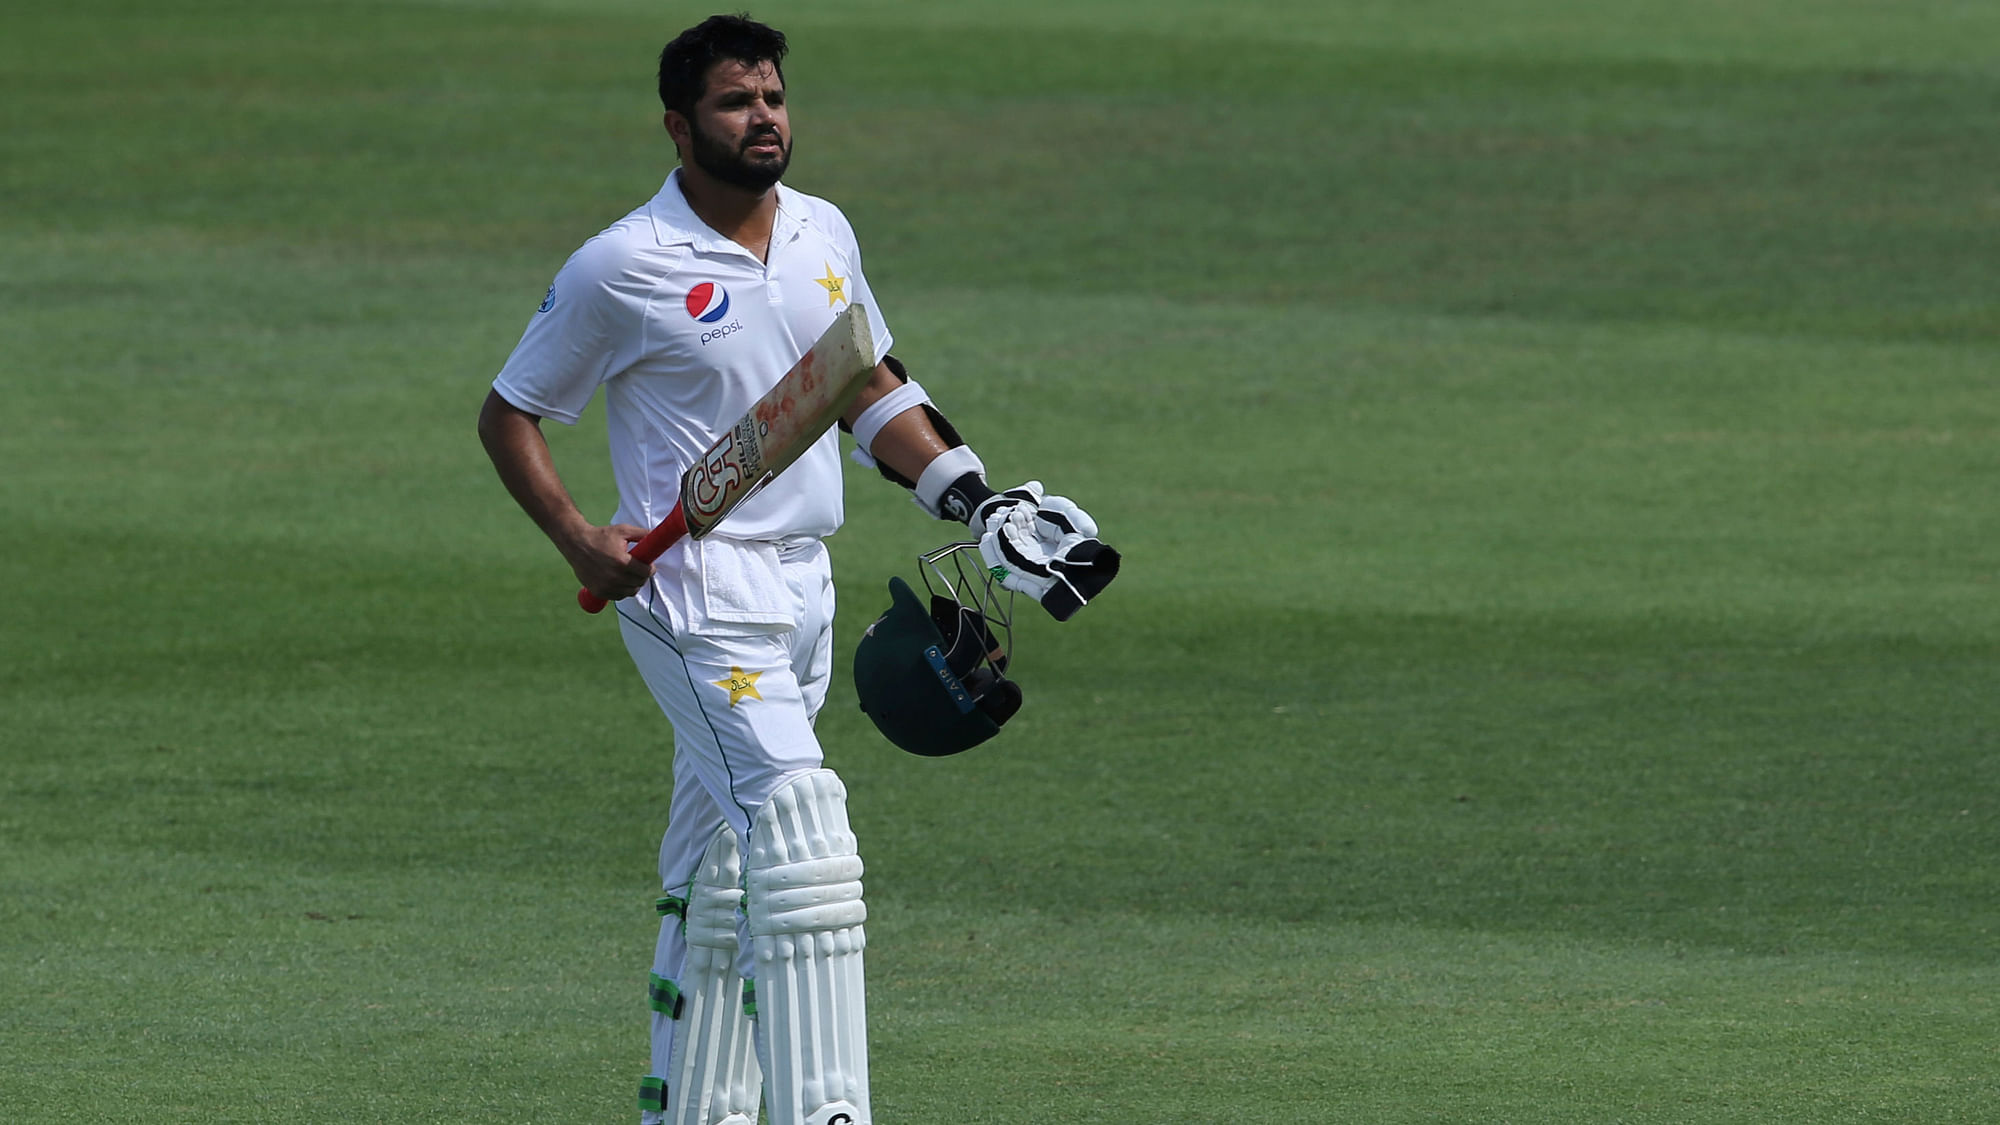 Play was dull to begin with, but was lit up by Azhar Ali’s embarrassing dismissal.